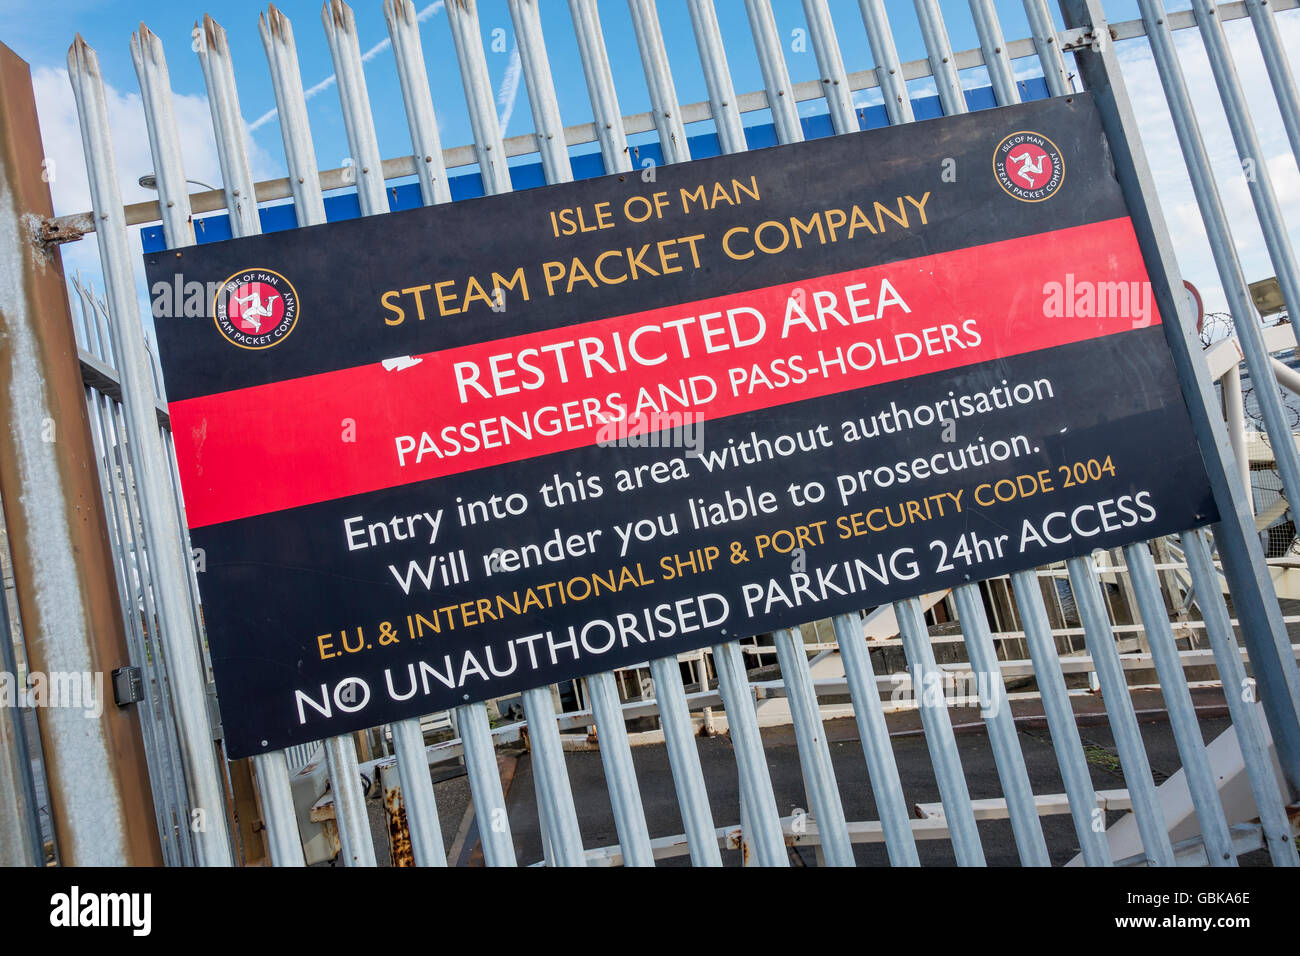 Isle of Man Ferry Steam Packet Company Restricted Area Notice Stock Photo